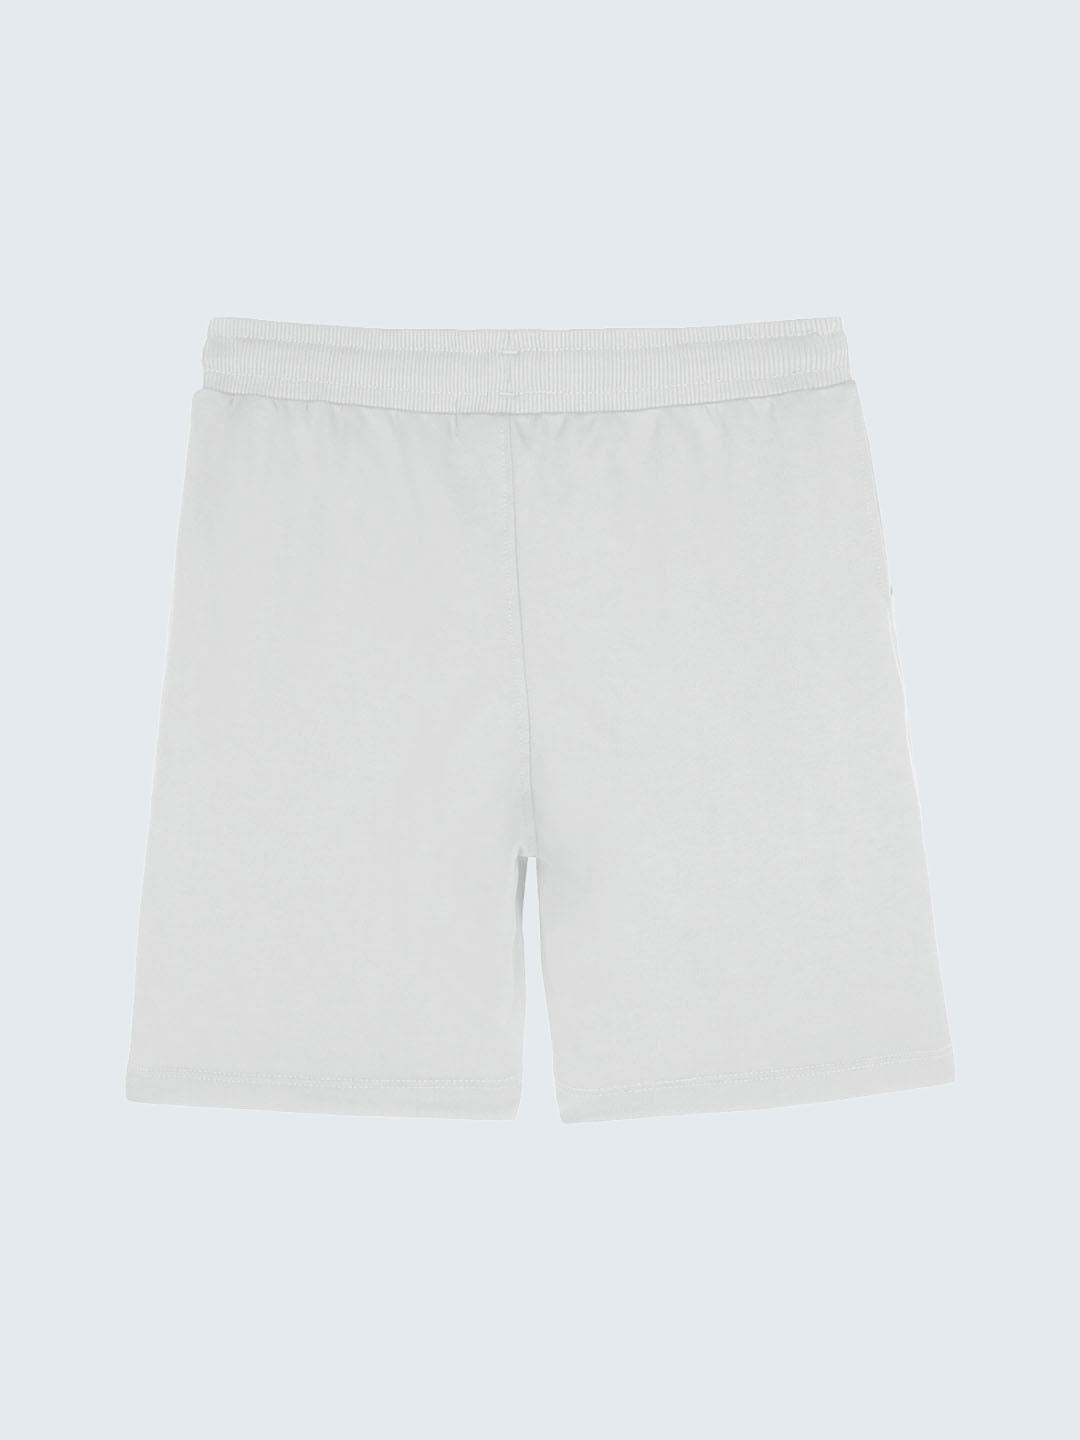 Kid's Active Shorts - White (Front)